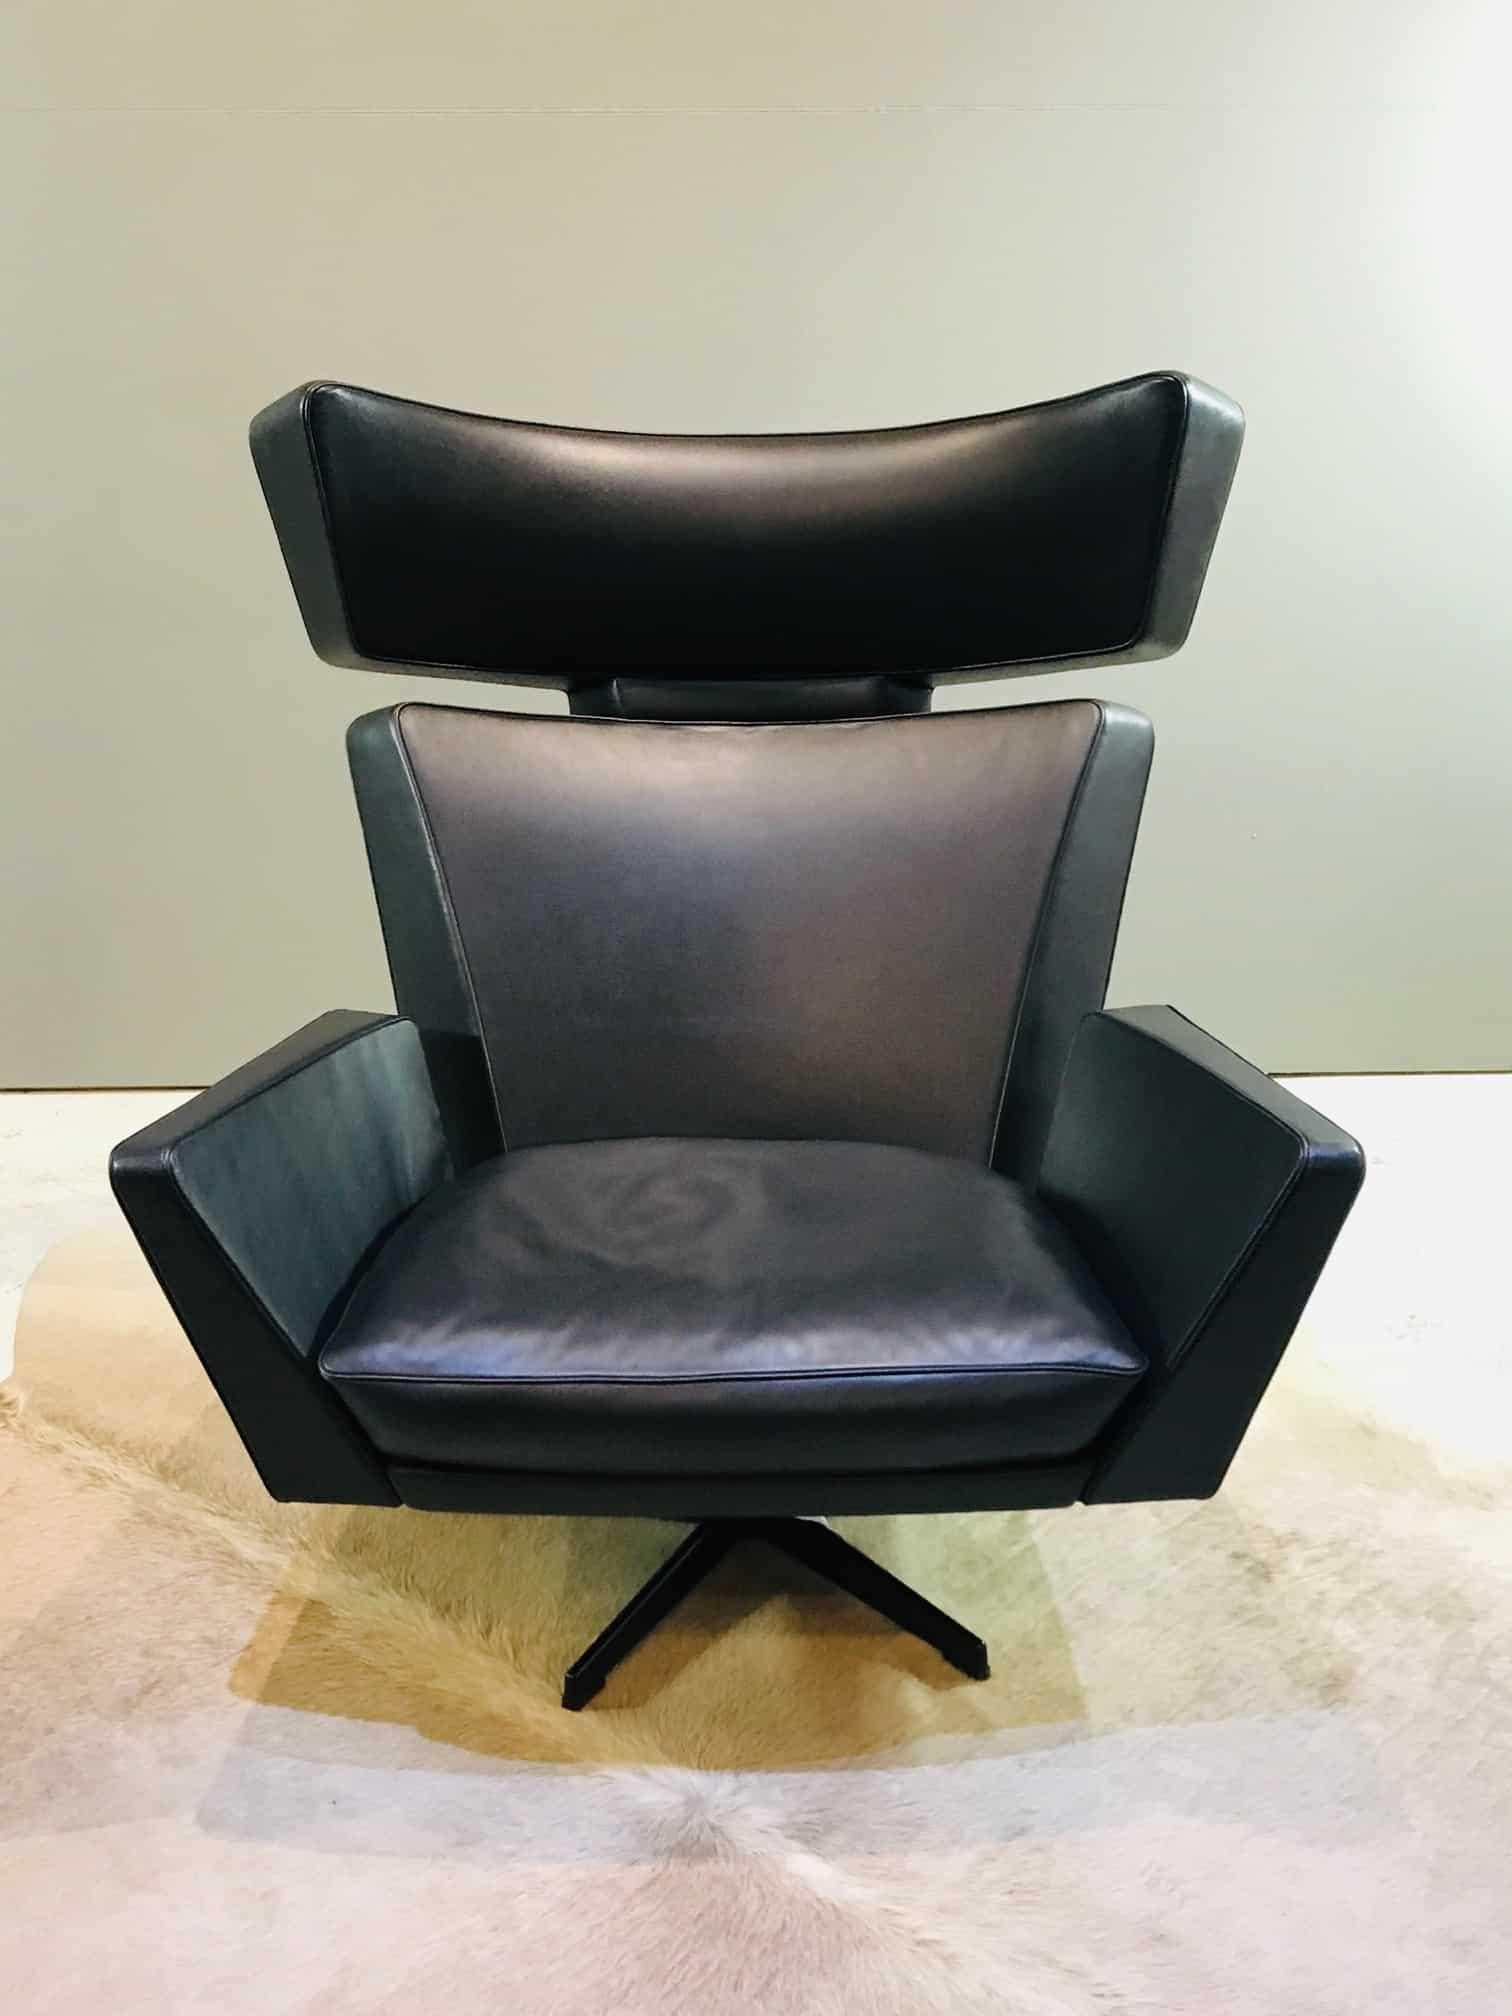 Midcentury Black Leather Lounge Chair by Arne Jacobsen Oksen, Ox Chair For Sale 1